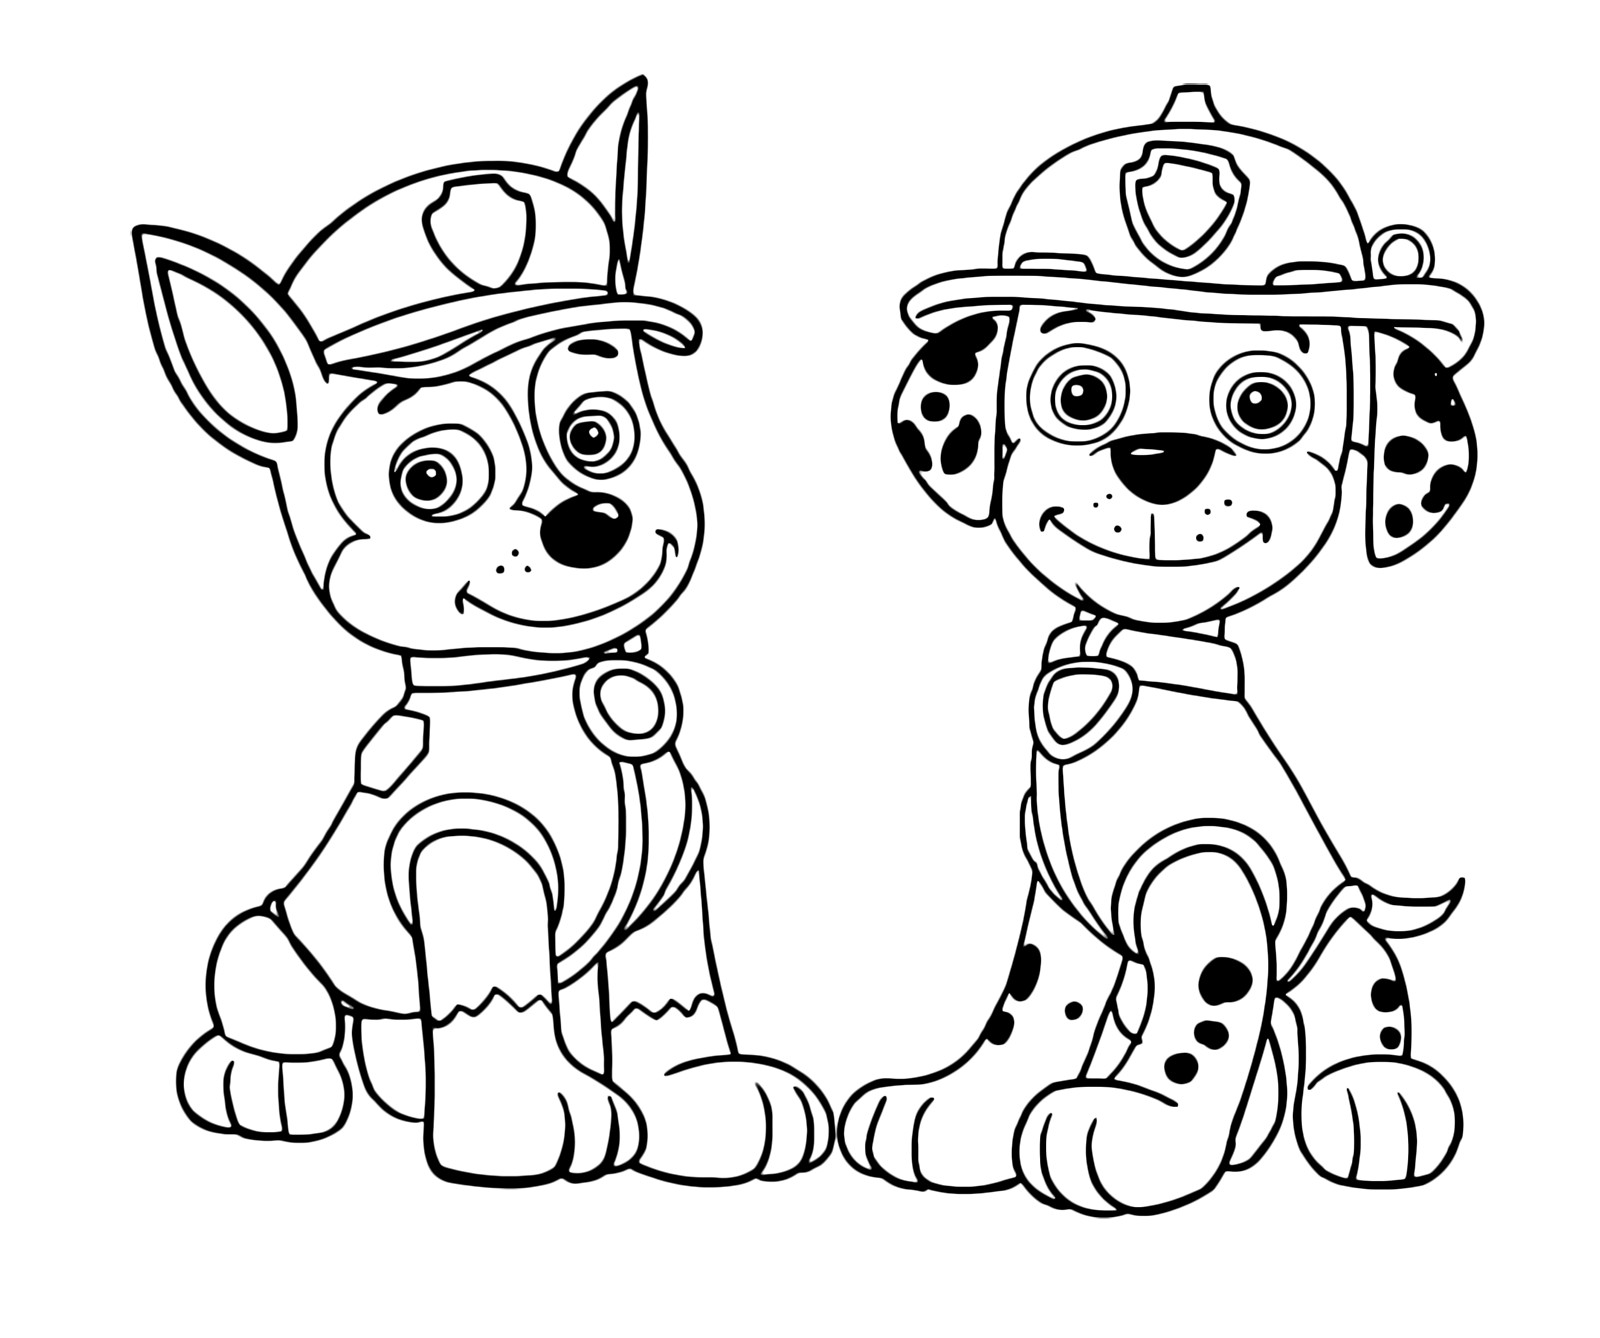 Paw Patrol Coloring Pages Marshall
 Marshall Paw Patrol Coloring Pages Sketch Coloring Page